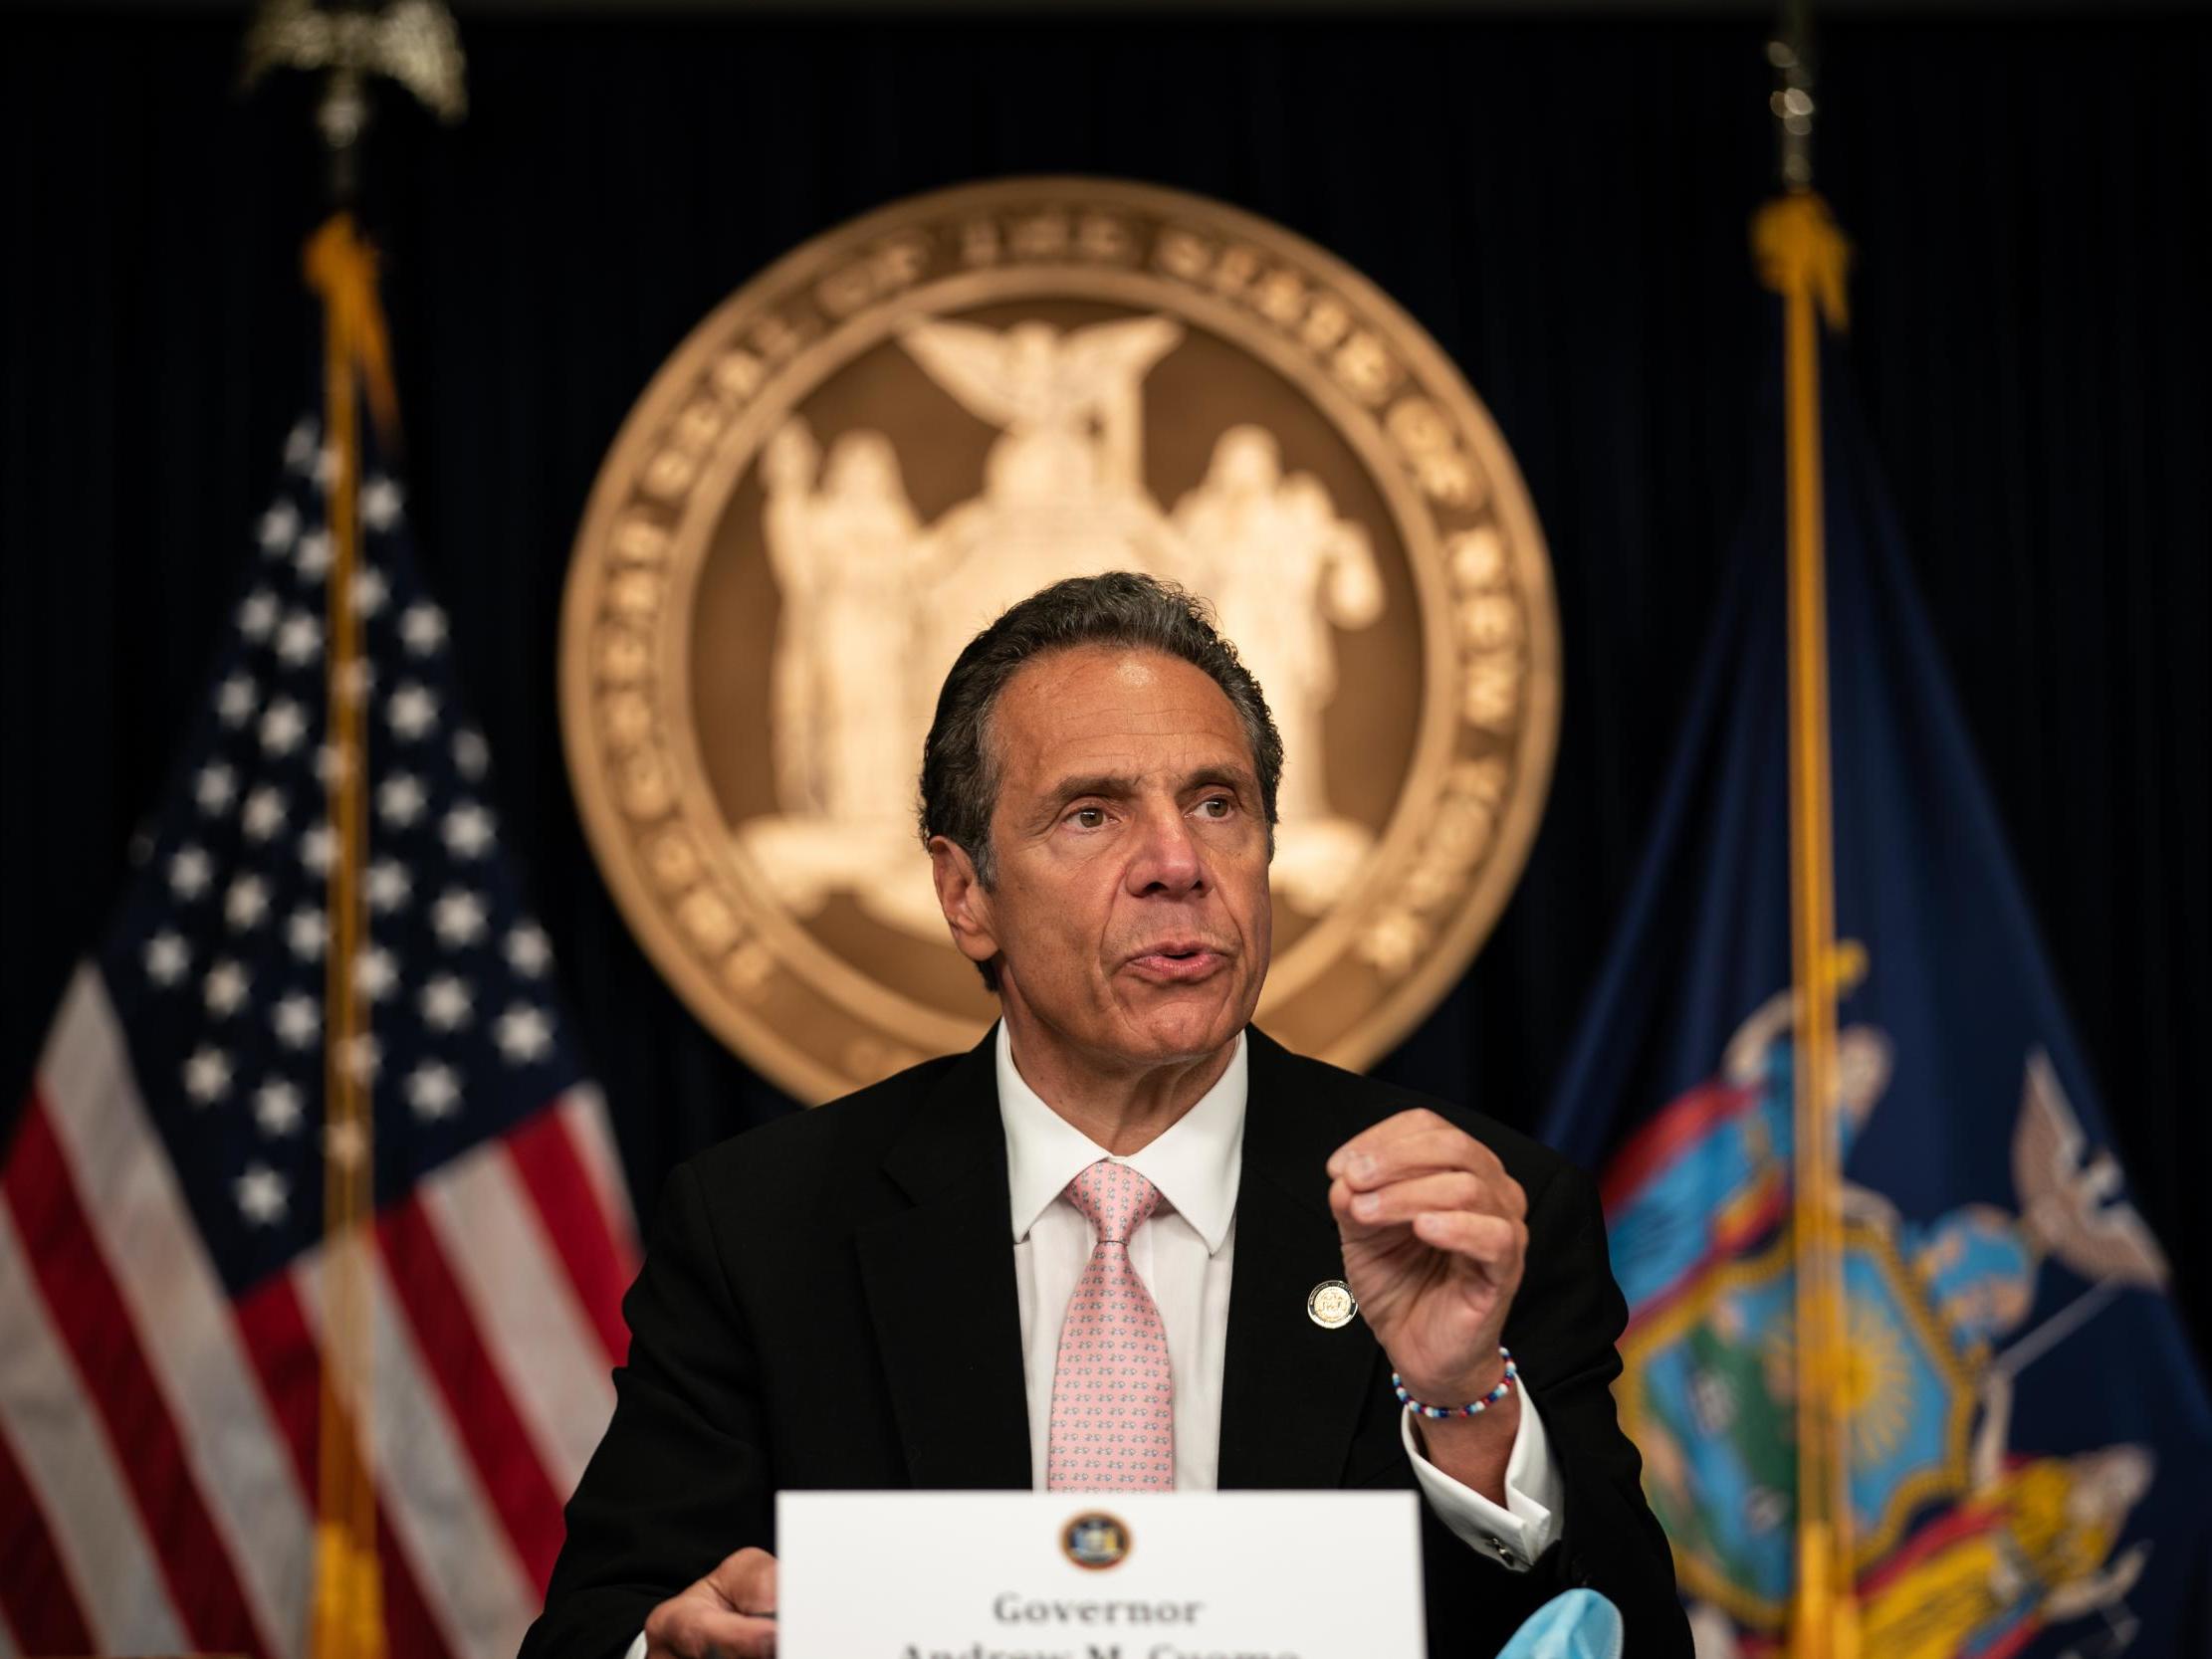 New York Gov Andrew Cuomo speaks during the daily media briefing at the Office of the Governor of the State of New York on 12 June